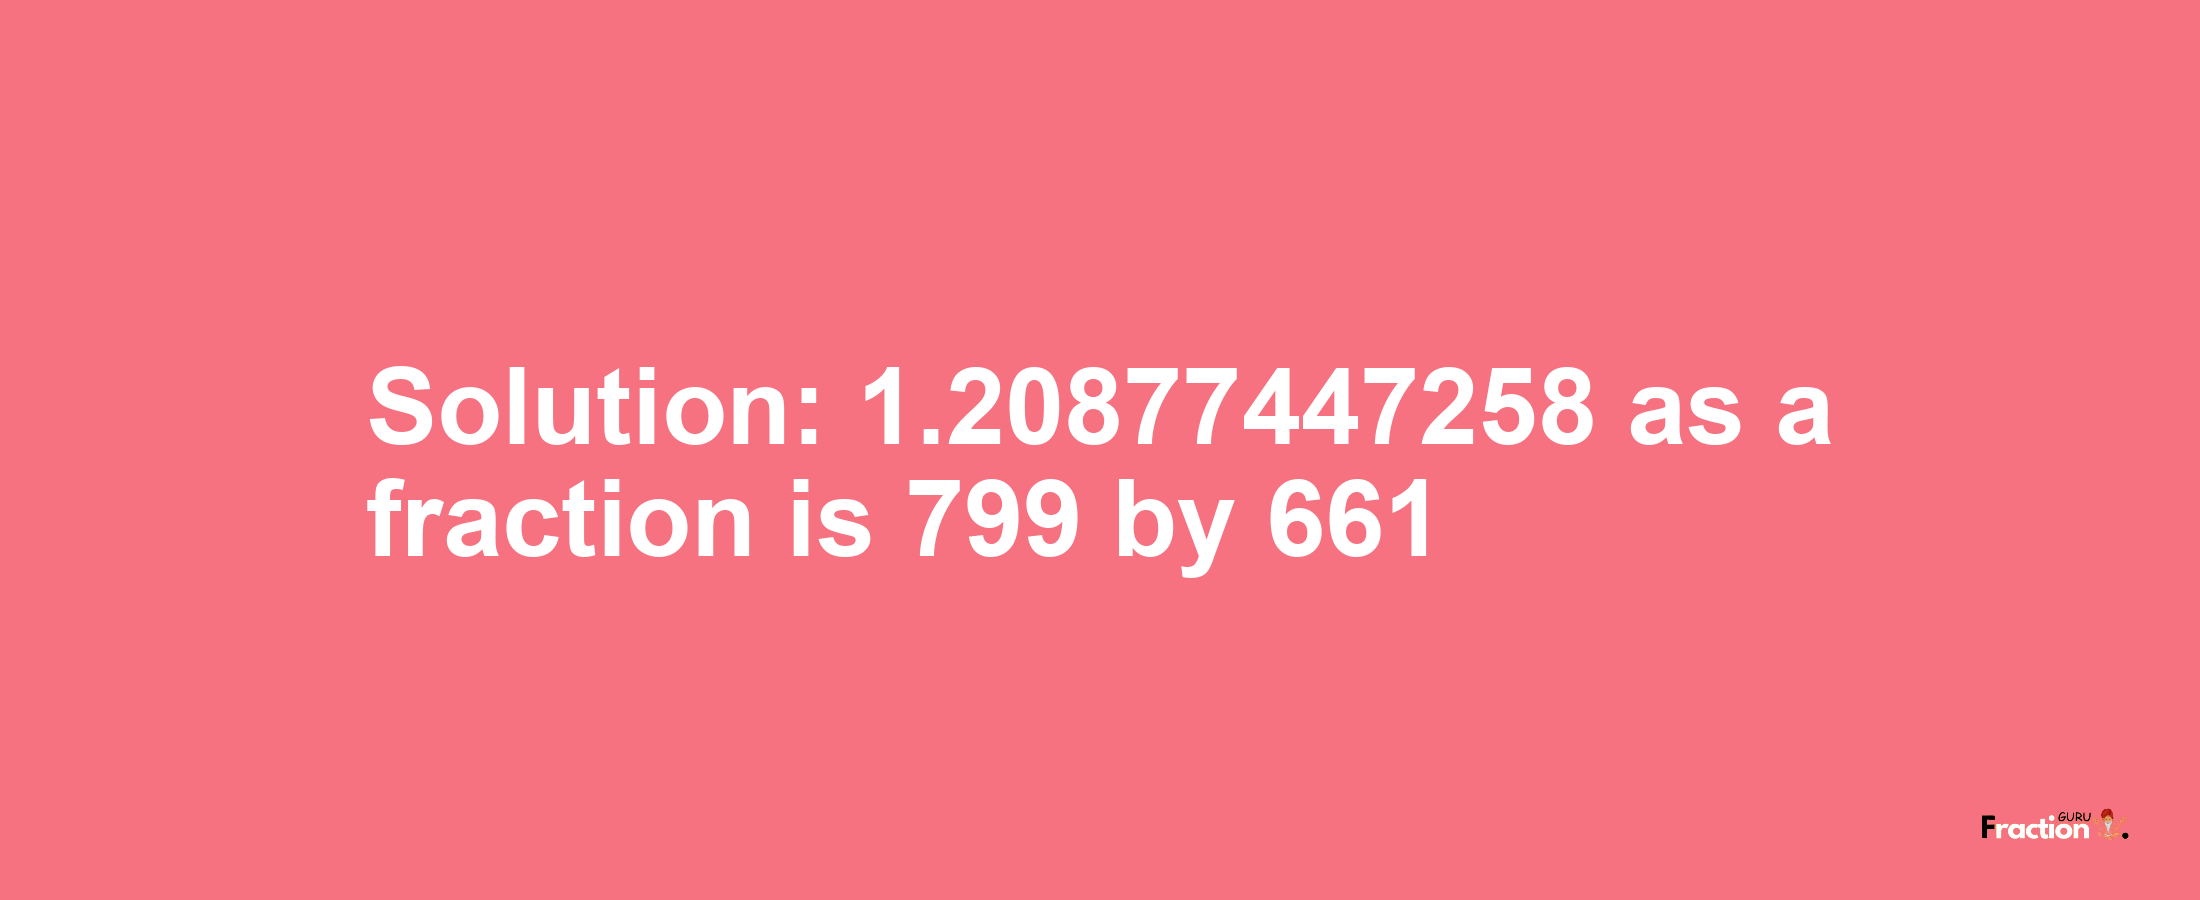 Solution:1.20877447258 as a fraction is 799/661